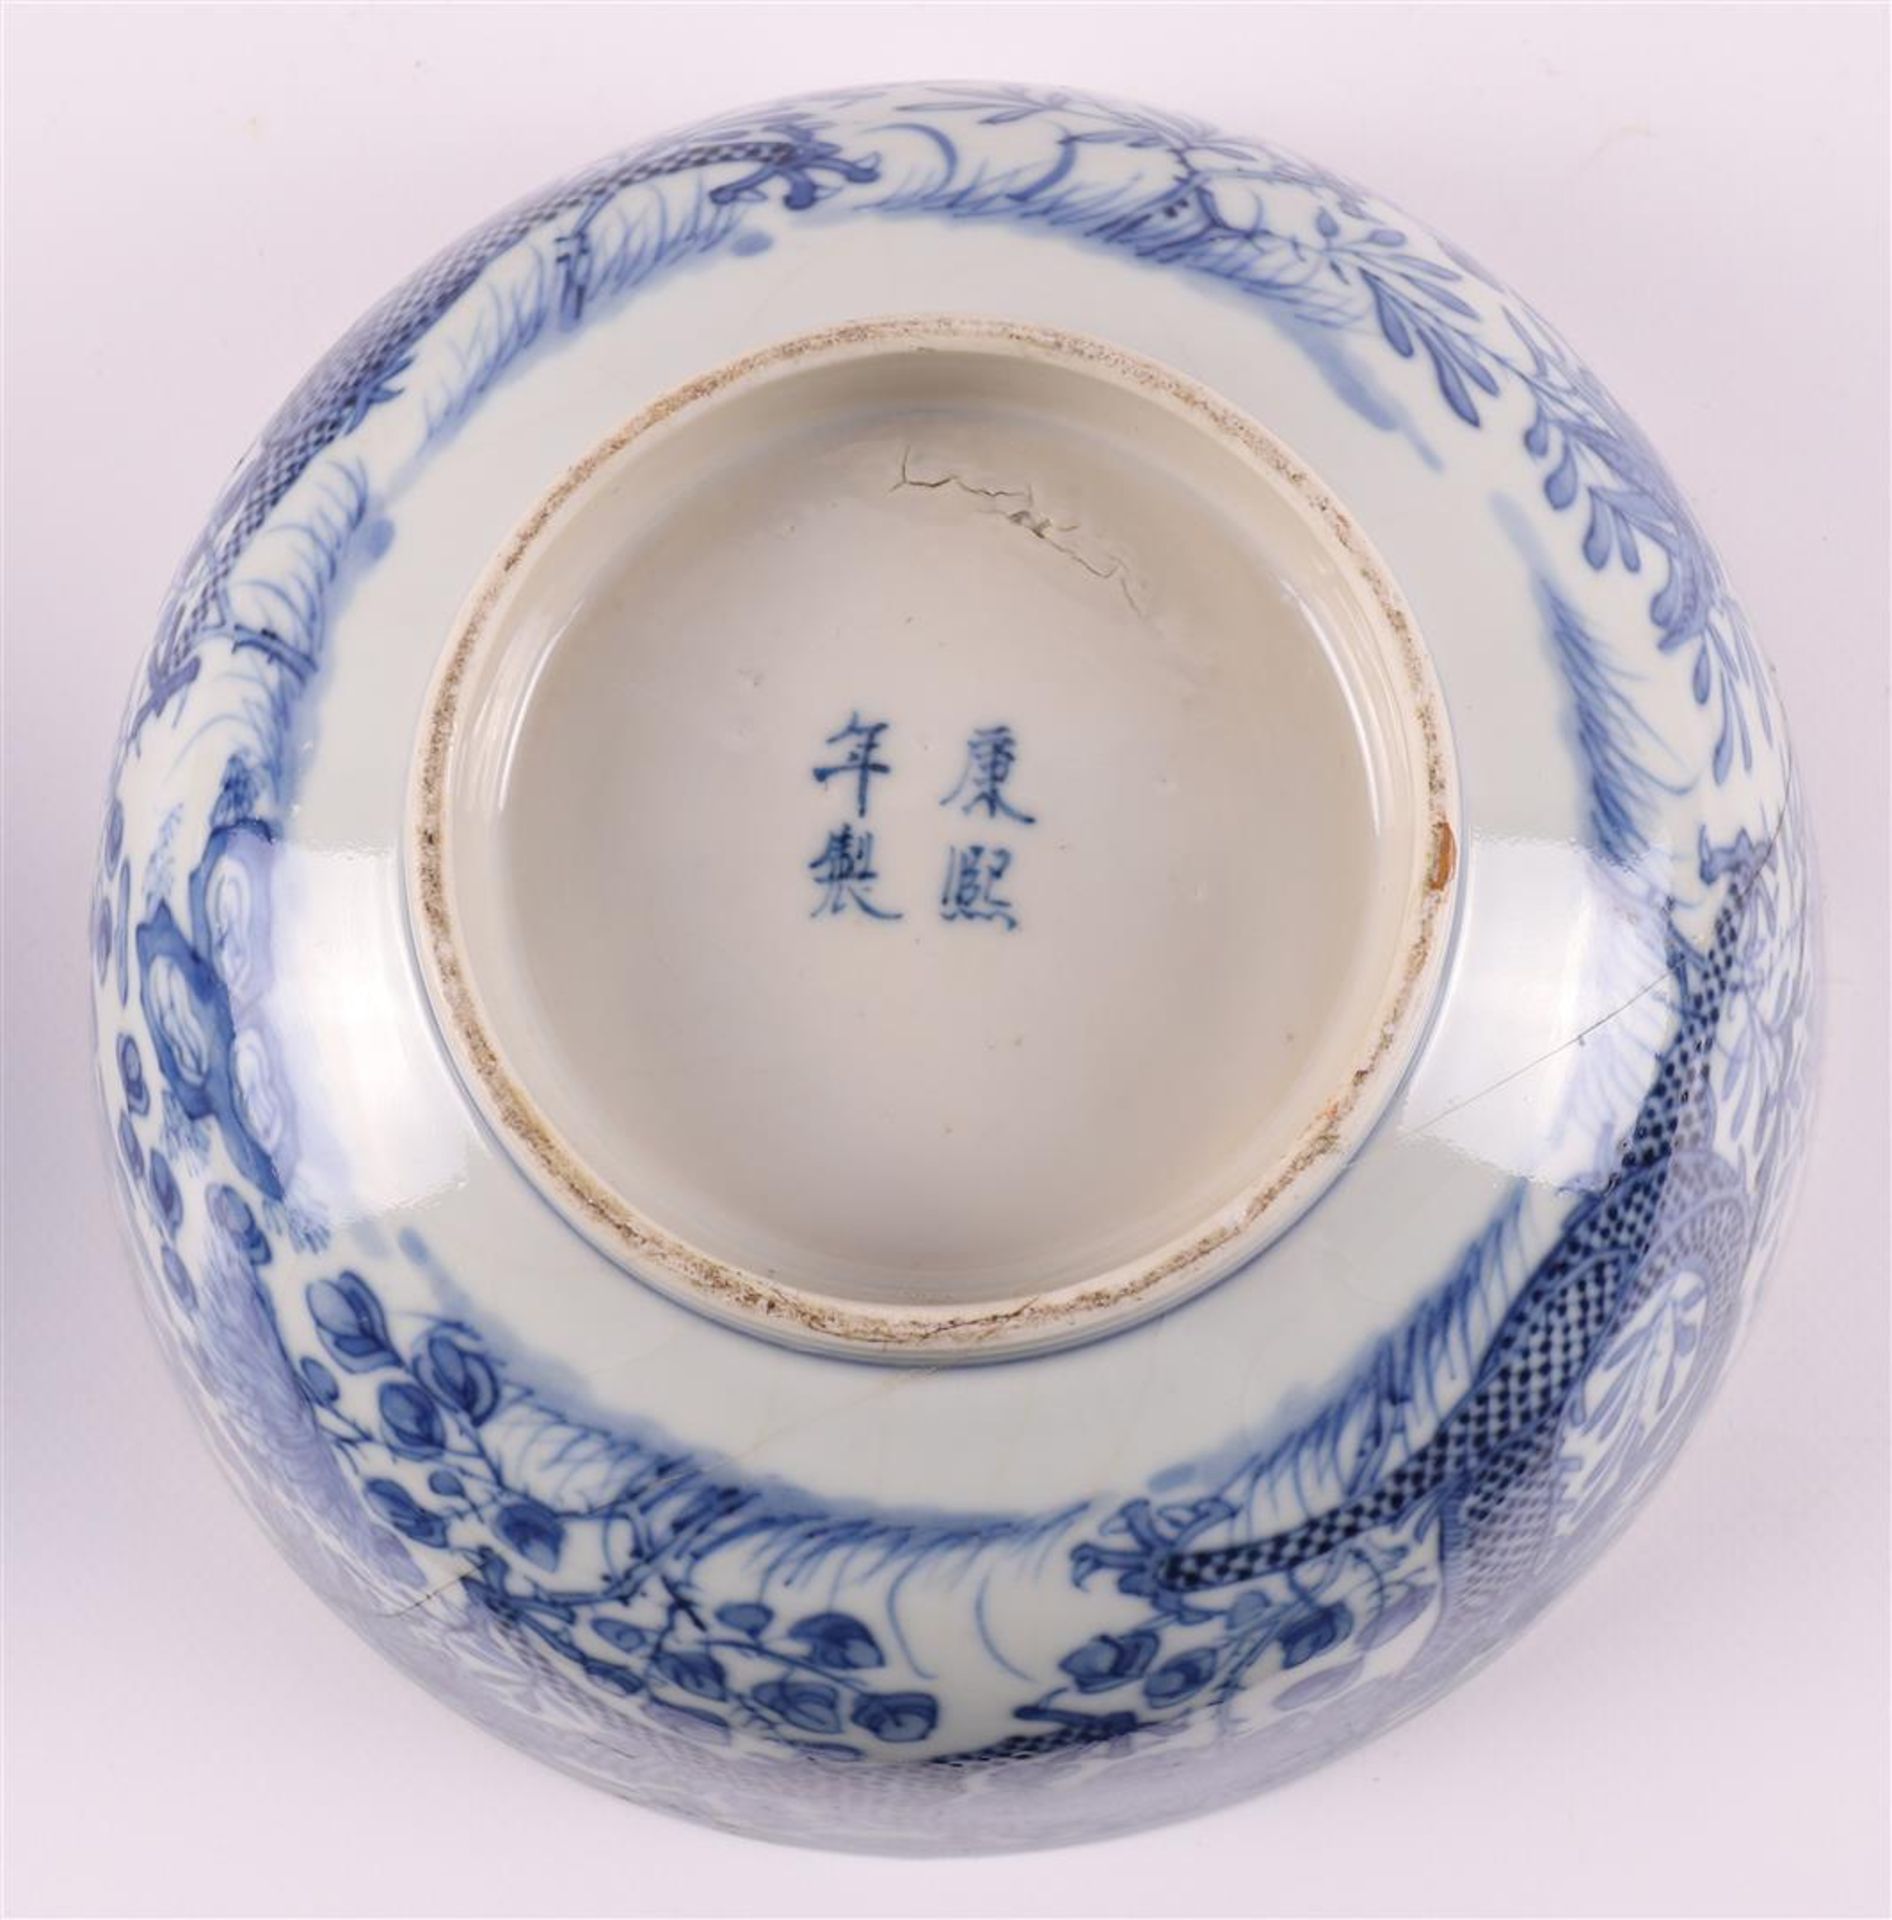 A lot of various Chinese porcelain bowls, China, 18th century - Image 8 of 25